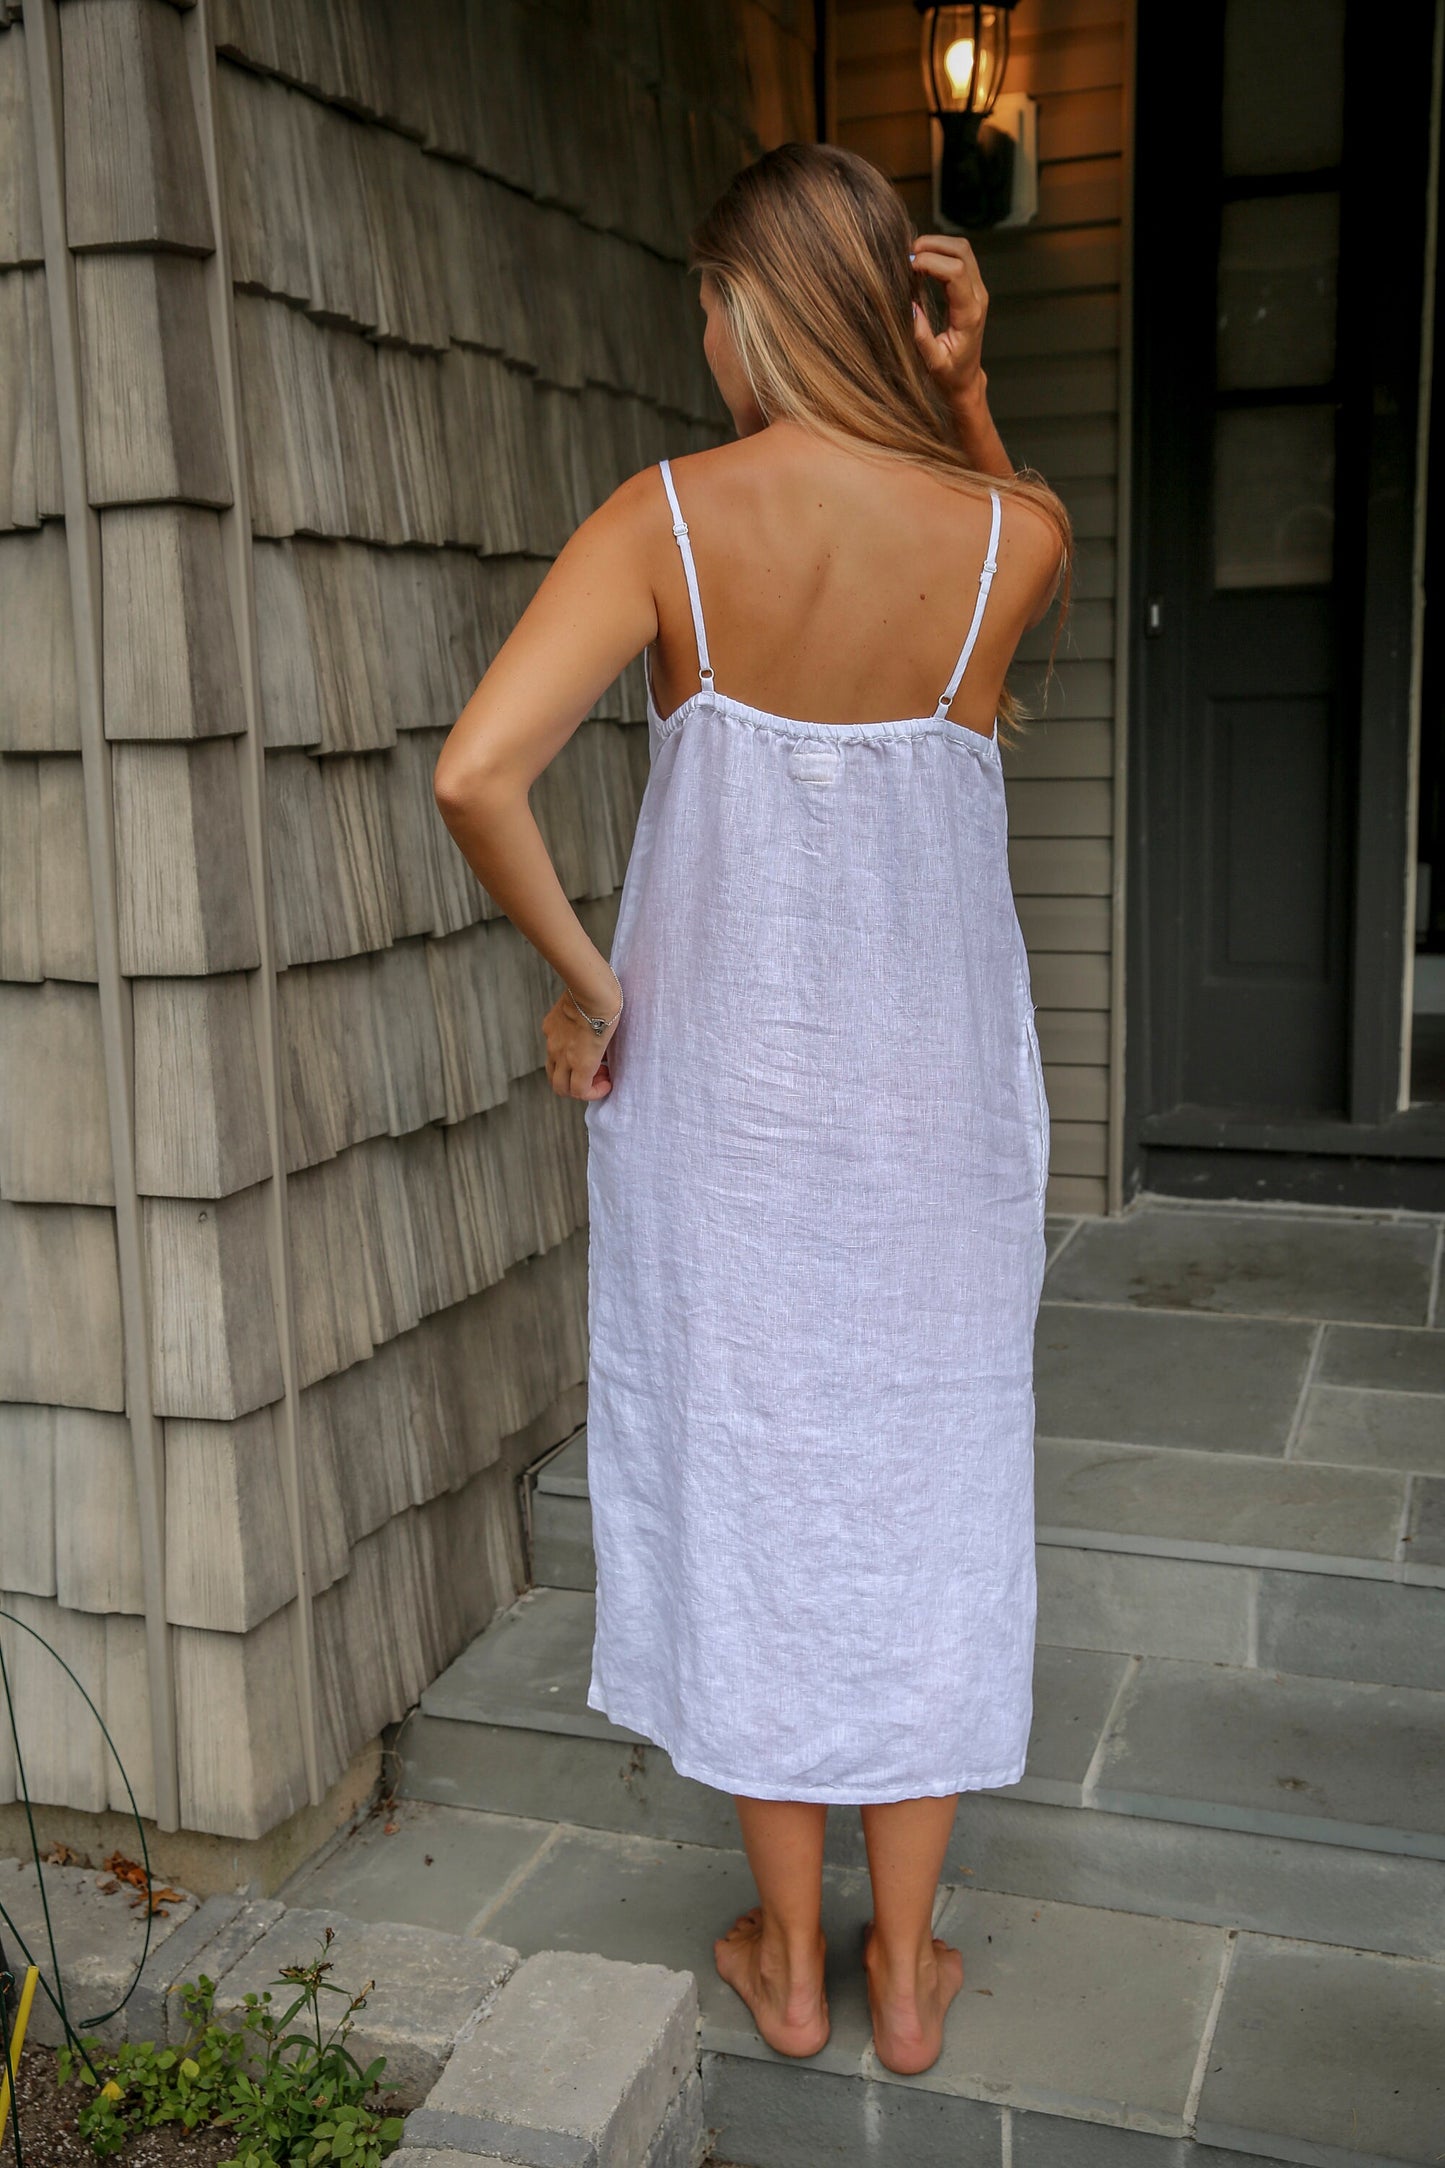 Bask in the summer sun donning the elegant Linen Maxi Dress.